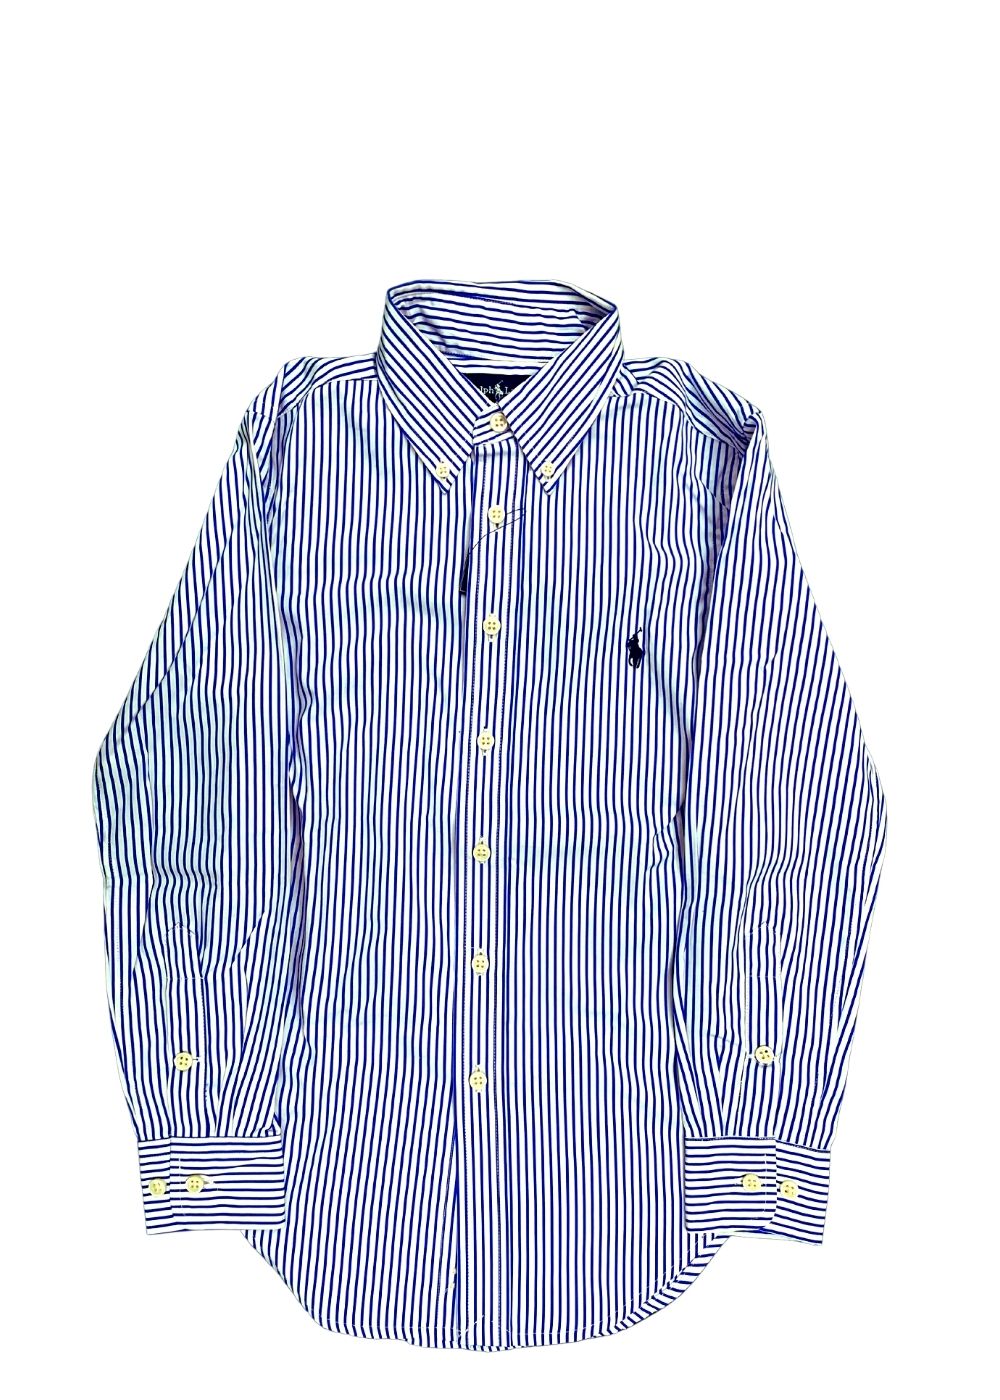 Featured image for “POLO RALPH LAUREN CAMICIA A RIGHE”